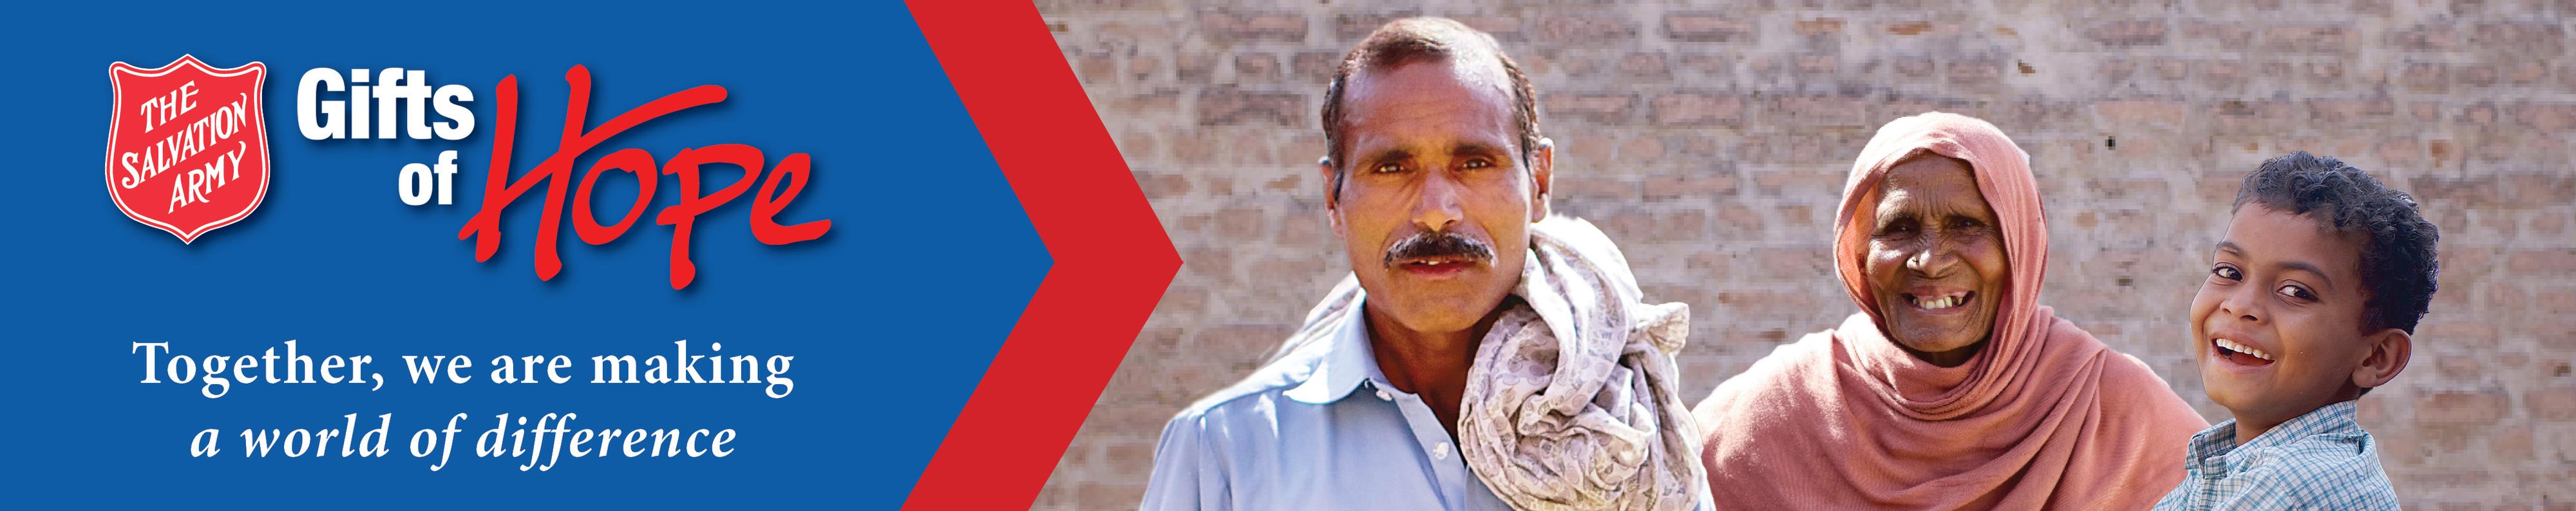 Gifts of Hope banner graphic with smiling senior, child and farmer from South Asia